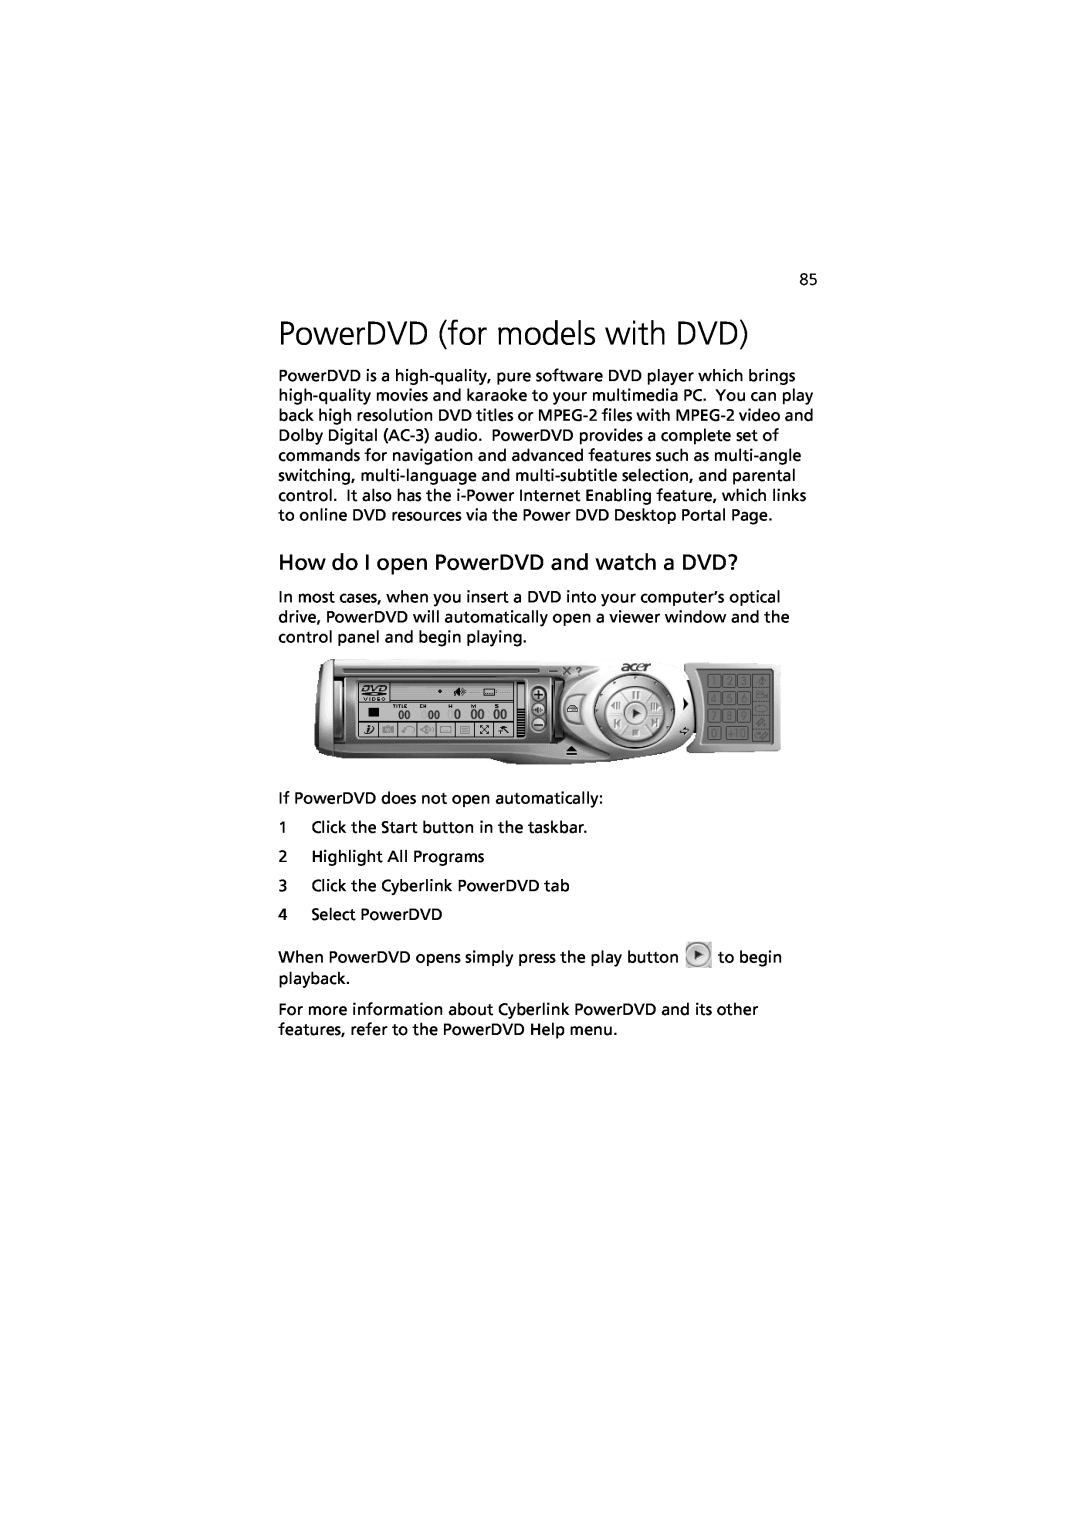 Acer 7600 manual PowerDVD for models with DVD, How do I open PowerDVD and watch a DVD? 